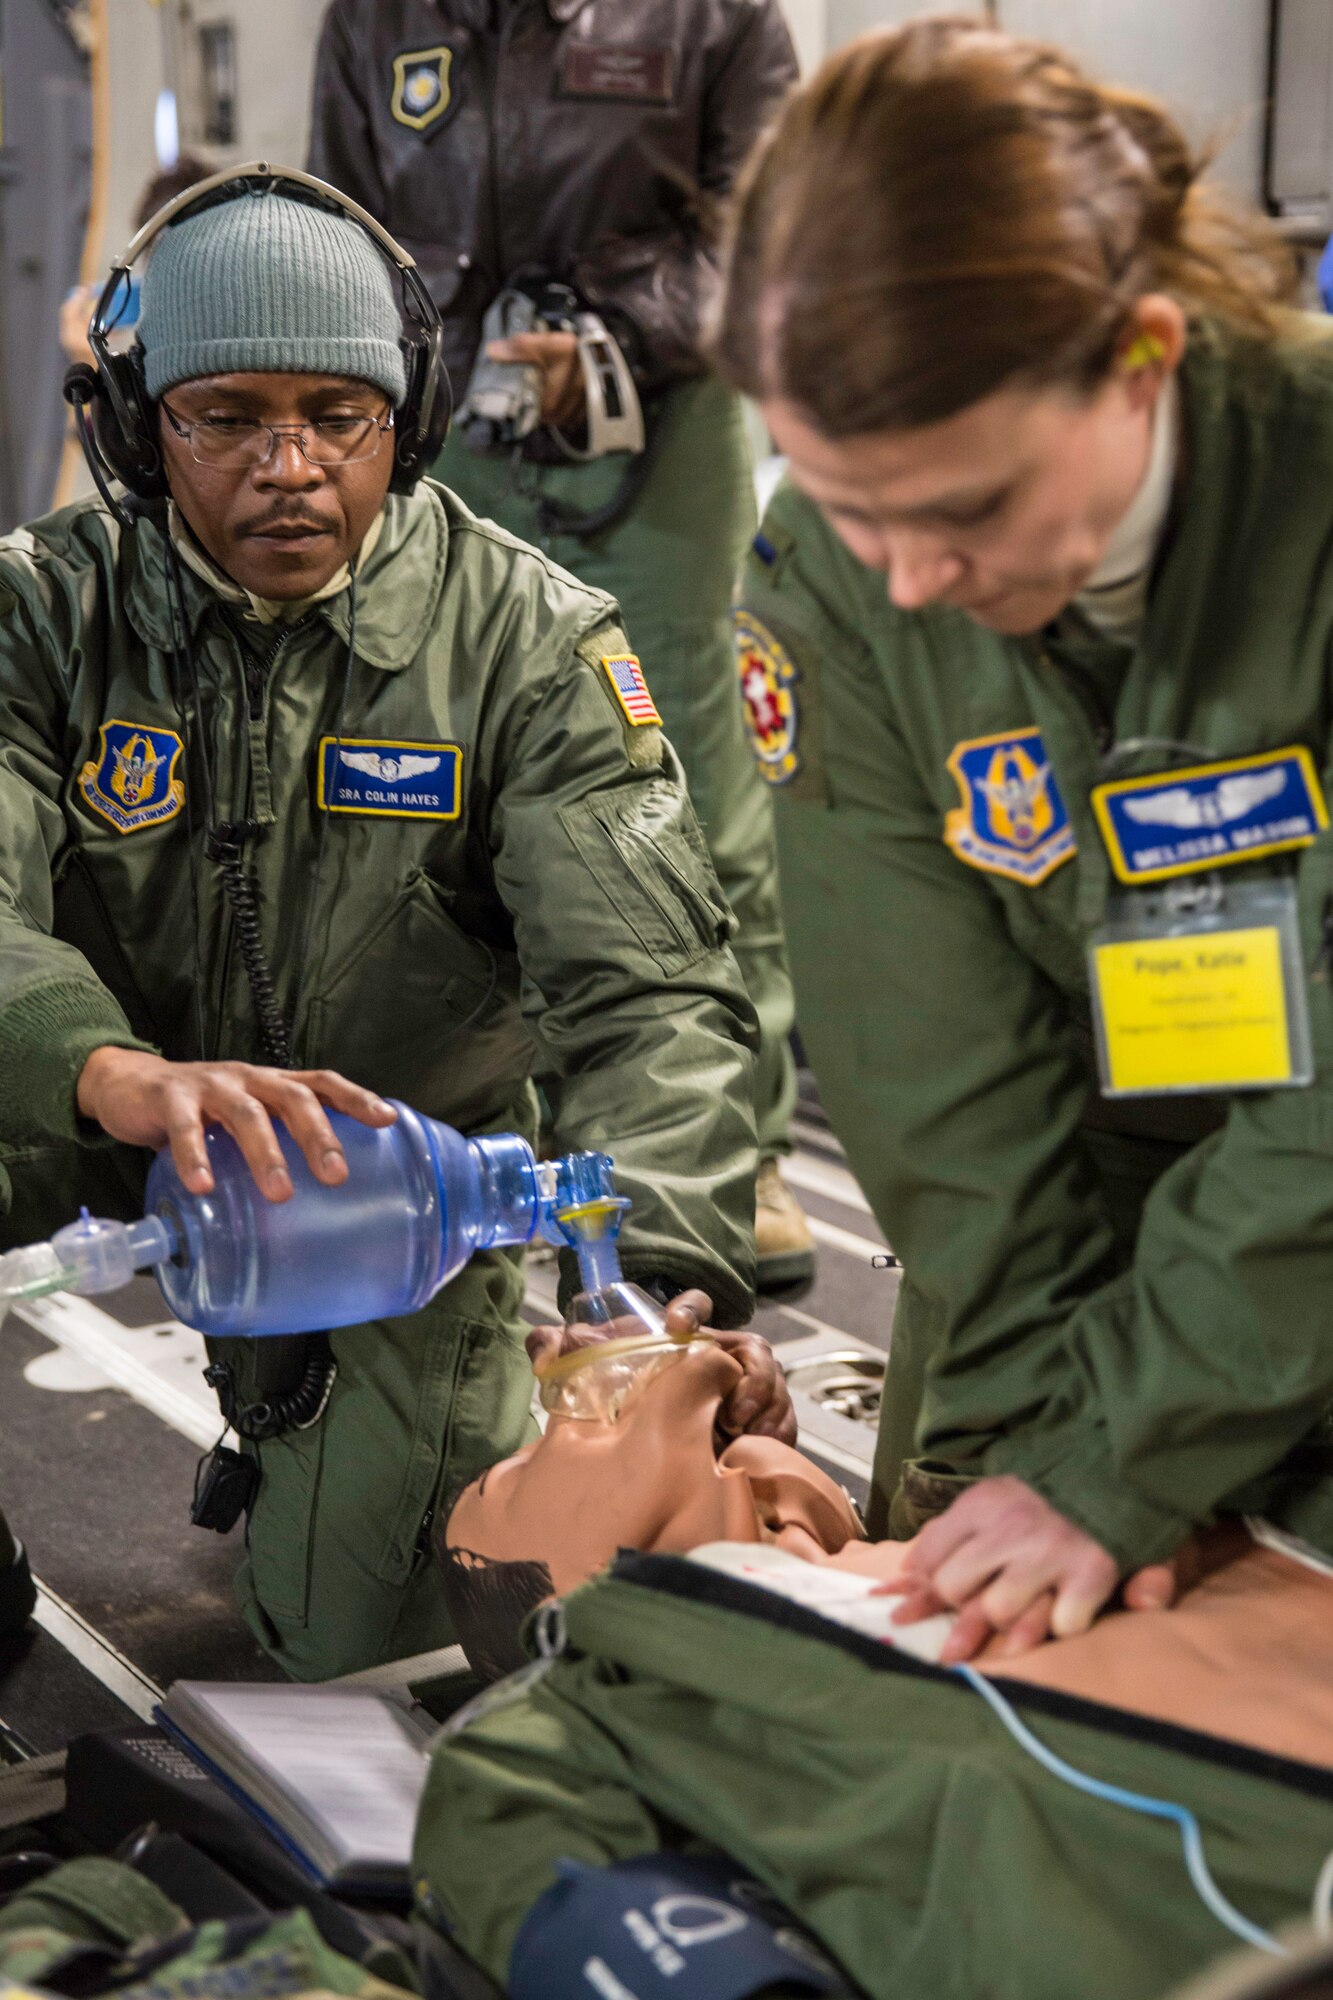 Senior Airman Colin Hayes and 1st Lt. Melissa Mason perform CPR on a mannequin Feb. 21, 2015 during a training mission in San Juan, Puerto Rico. The mission was part of a three day fly-away with Airmen from the 315th Airlift Wing at Joint Base Charleston, S.C. and aeromedical Airmen from the 459th Air Refueling Wing at Joint Base Andrews, Md. The training mission was a cost-effective means to accomplish currency items and evaluations for flight crew members and provided C-17 familiarization and proficiency training for aeromedical Airmen. Hayes is an aeromedical technician and Mason is a flight nurse. Both are assigned to the 459th Aeromedical Evacuation Squadron. (U.S. Air Force Photo/Tech. Sgt. Shane Ellis)